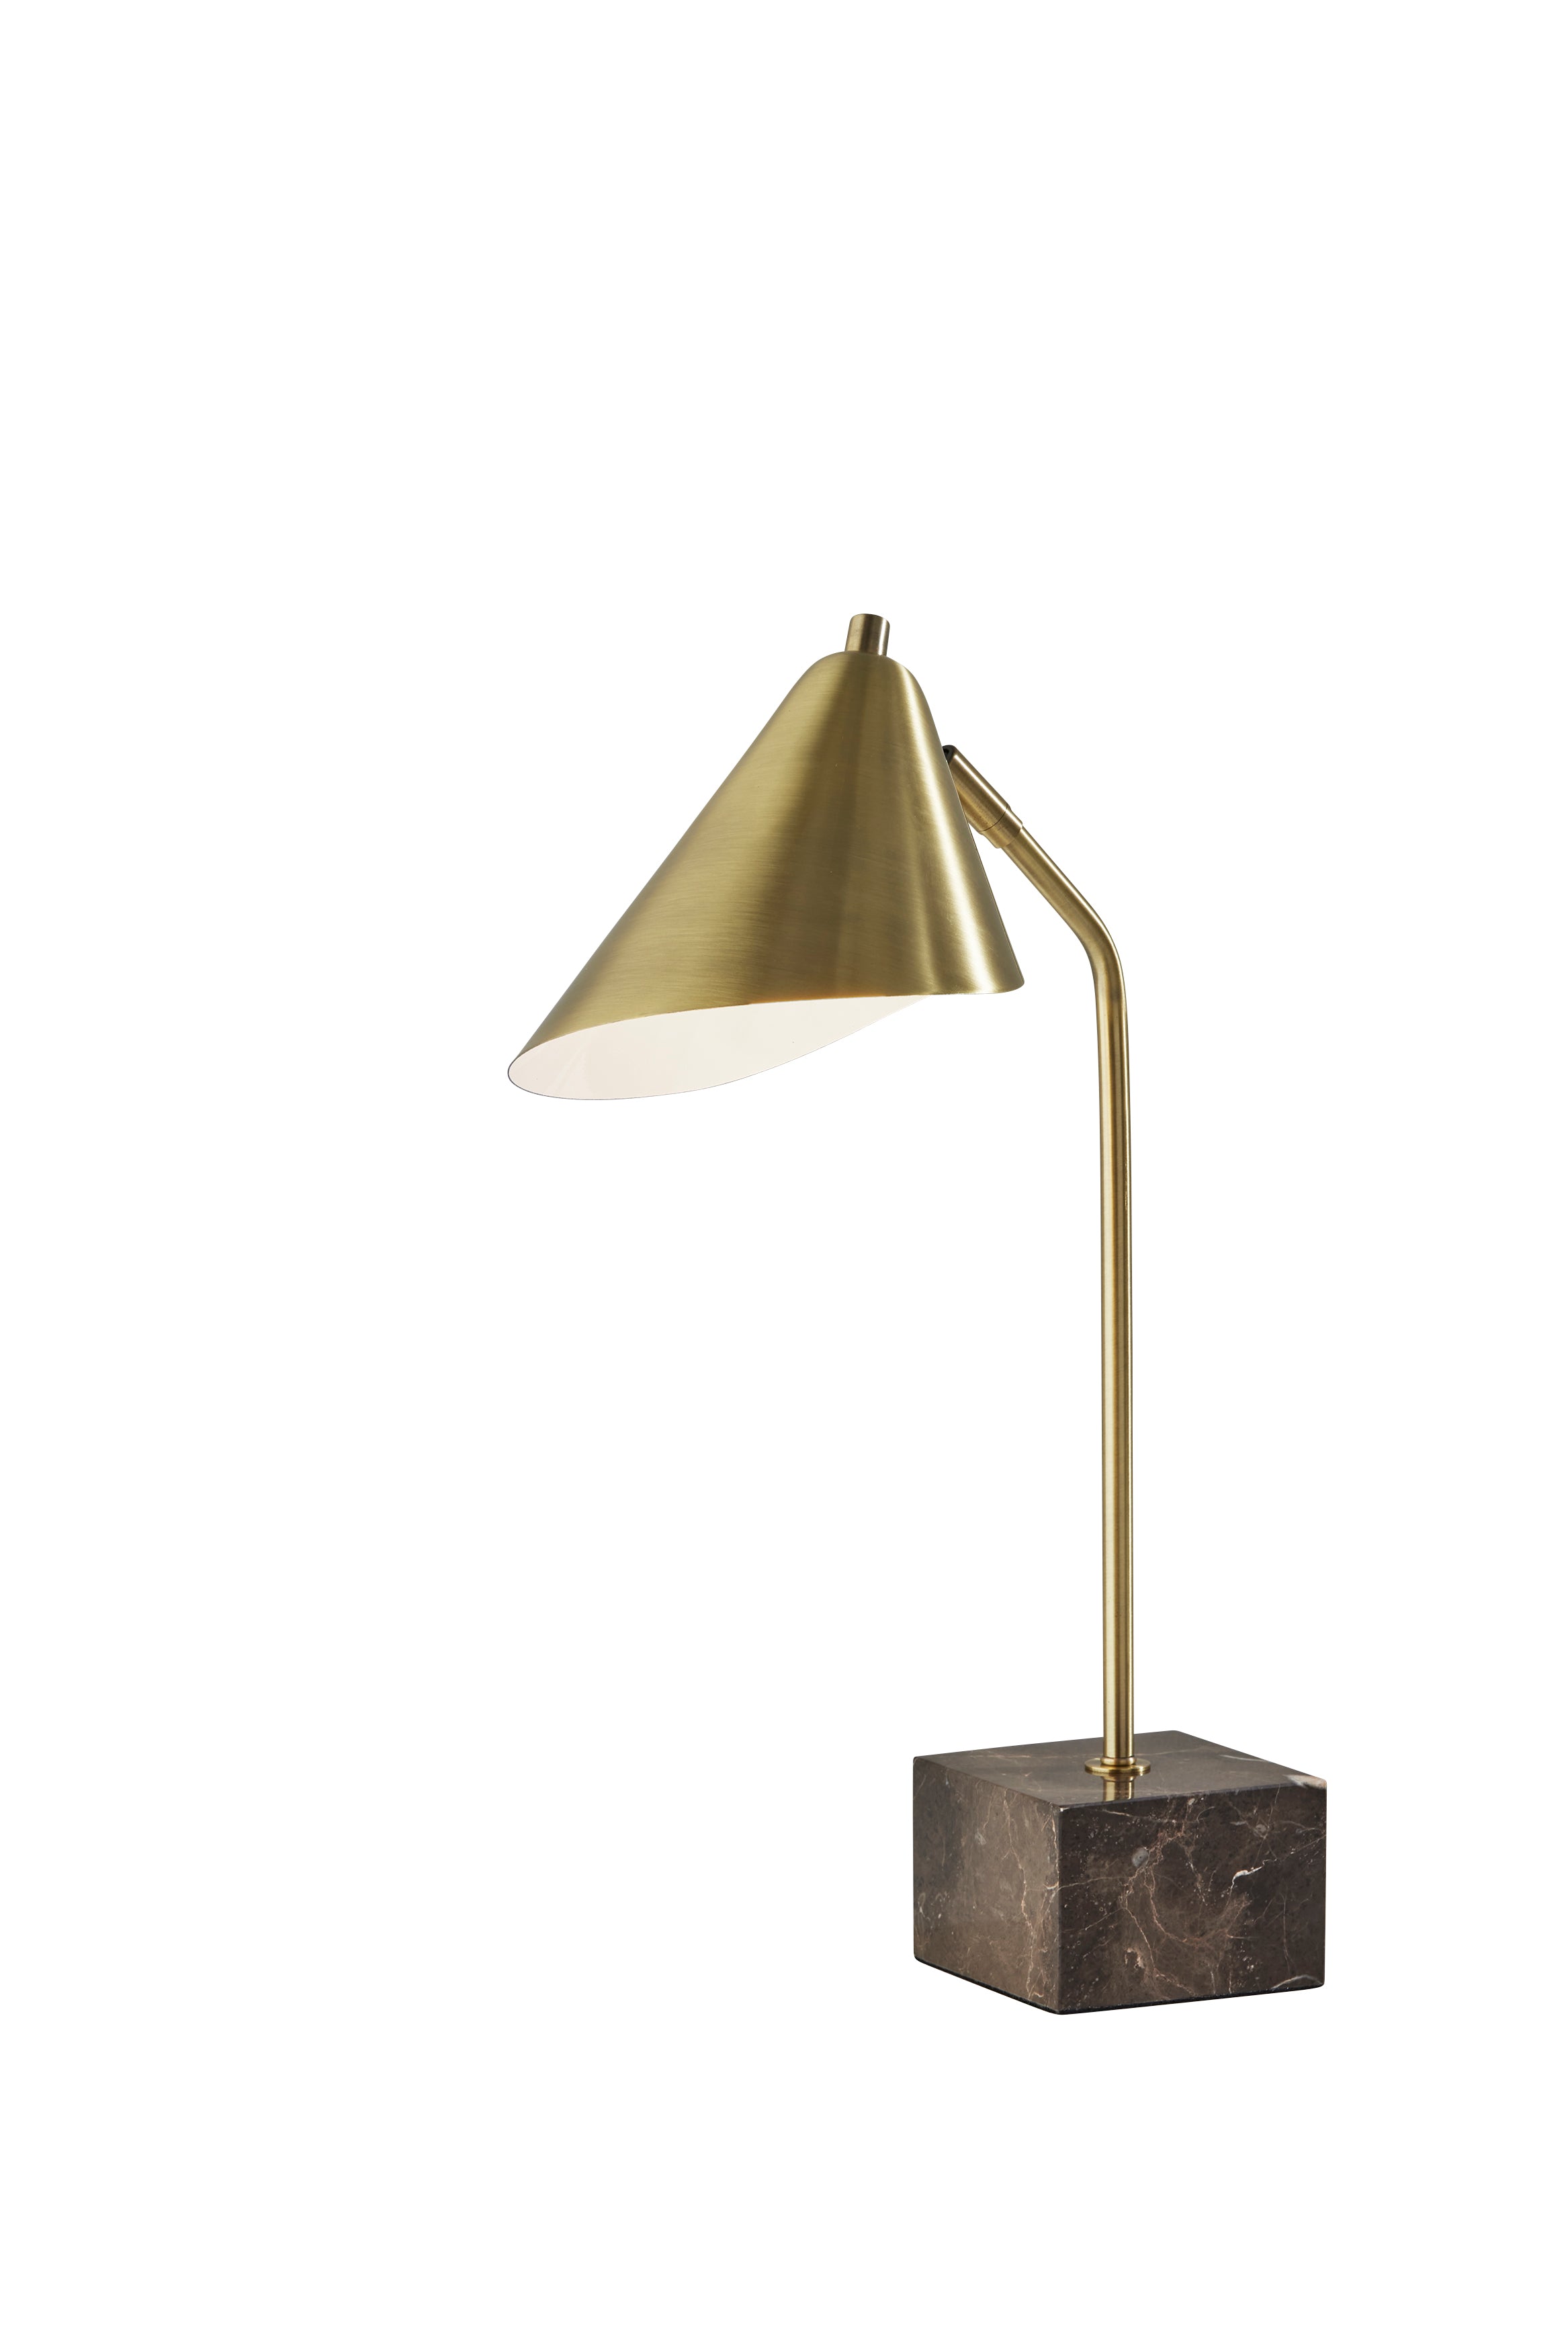 HAWTHORNE Lampe sur table Or - 4246-21 | ADESSO